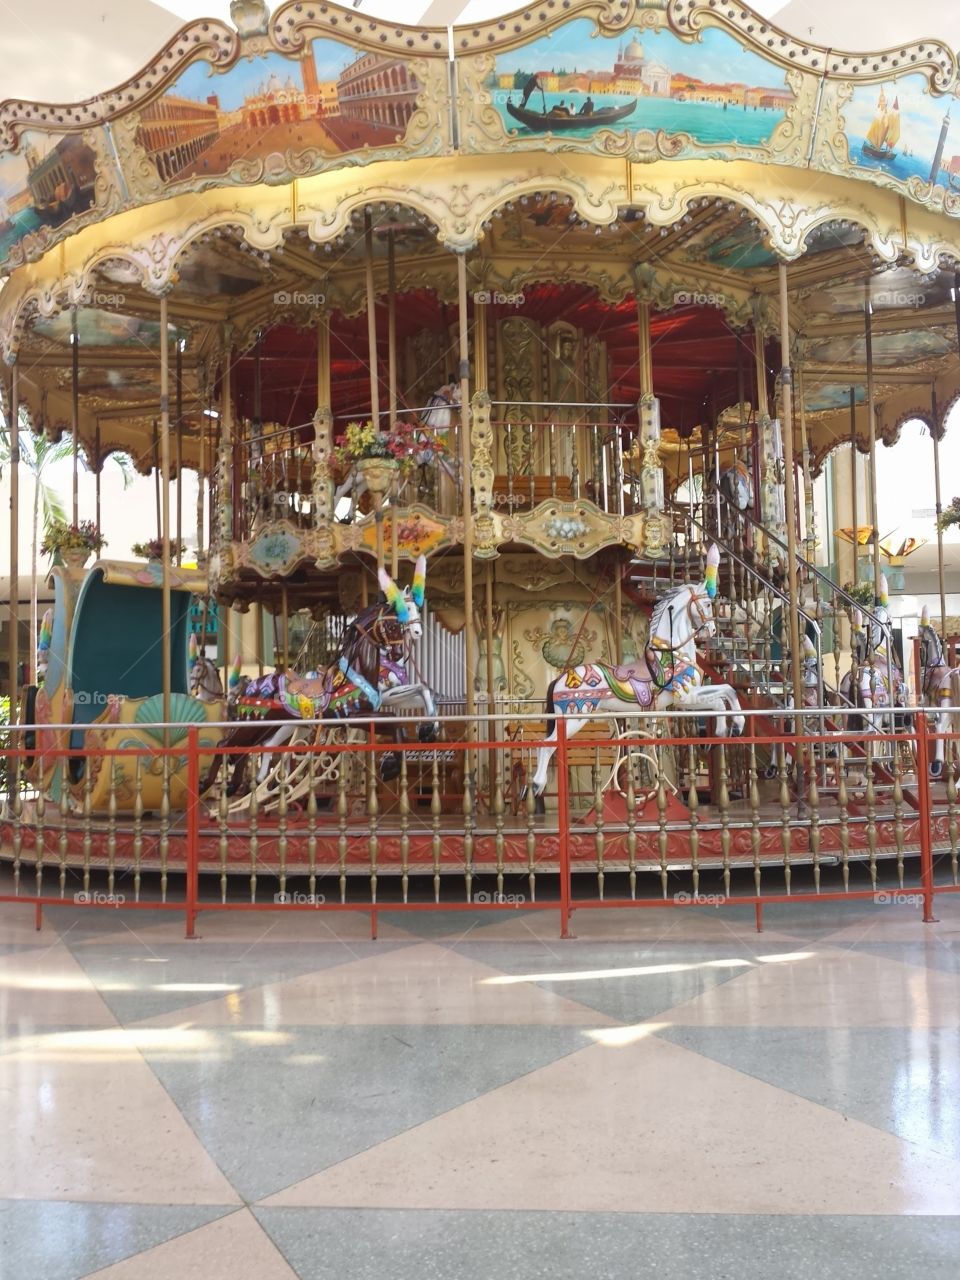 Merry in Memphis. A picture of the merry go round in a mall in Memphis, Tn.